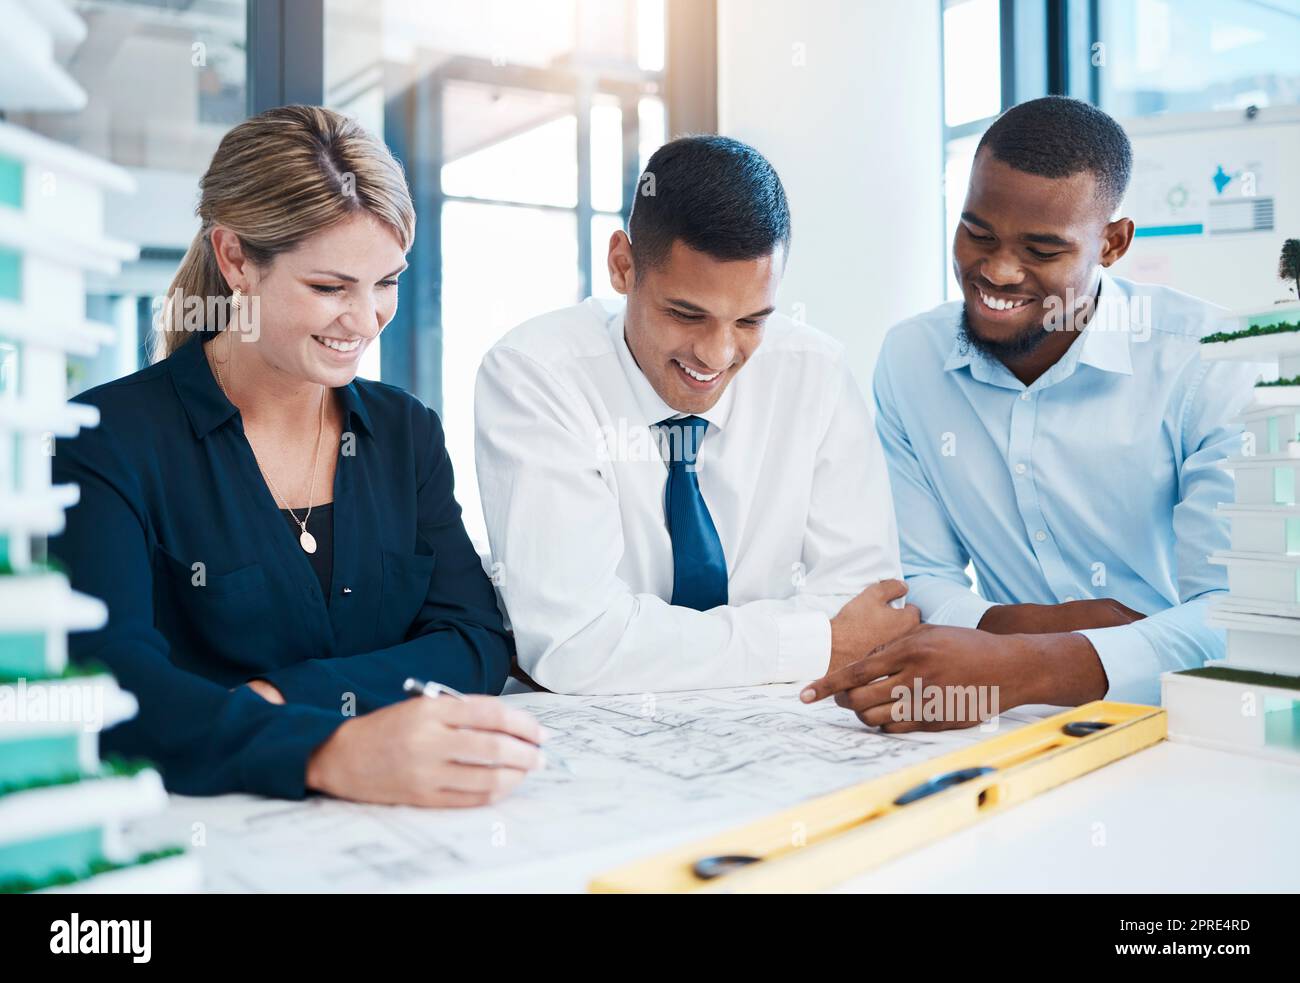 Architect, builder and engineer working together as a construction team on plans and blueprints in their architectural office. Architecture and design with a group of business people discussing work Stock Photo